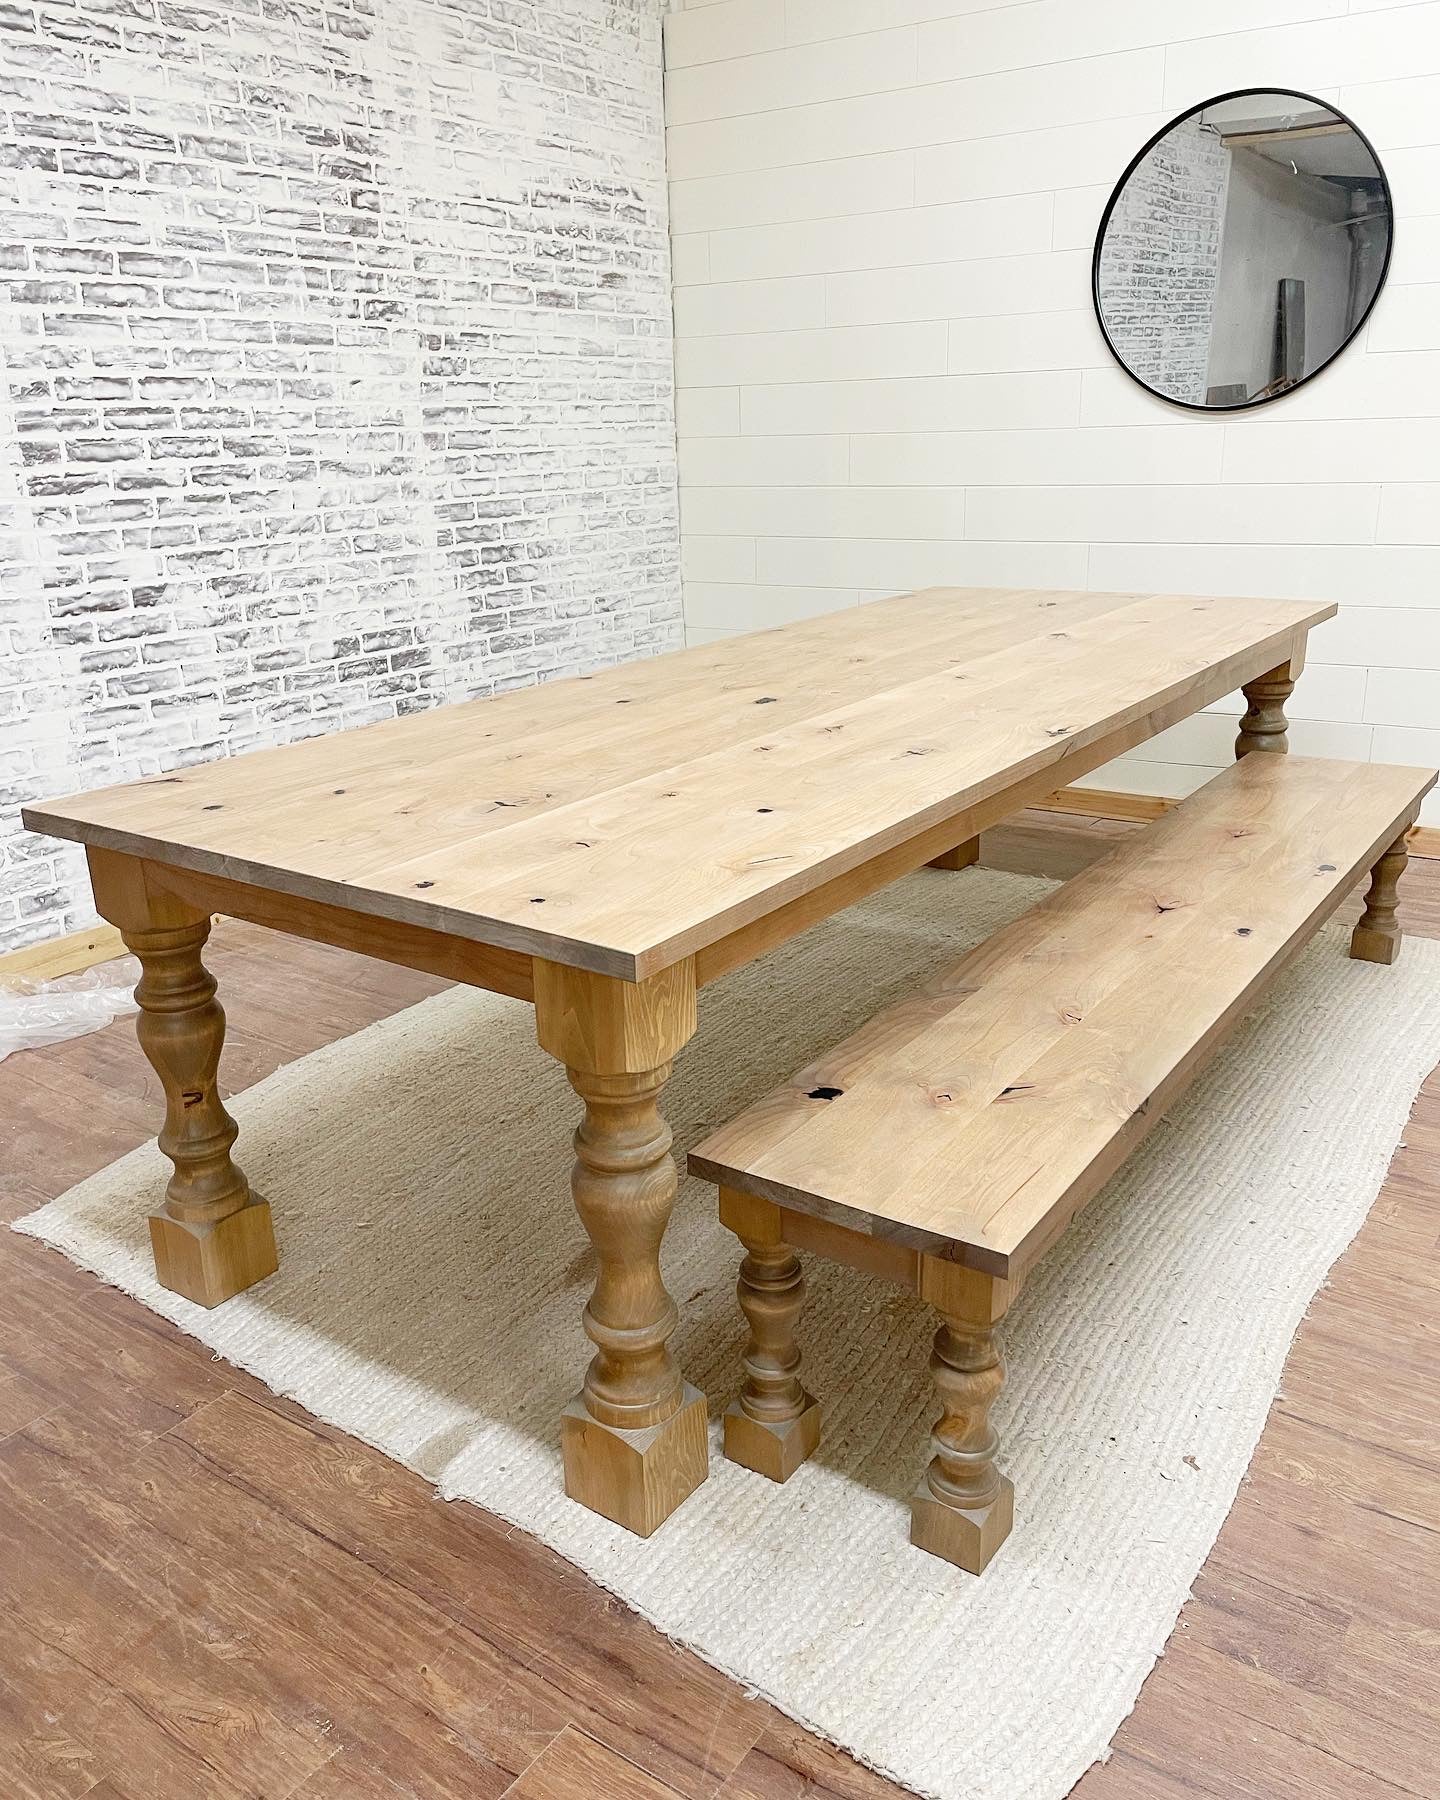 Pictured with an 8' L x 42" W Rustic Alder top and Pine Legs table stained Weathered Oak. Pictured with a Matching Bench.